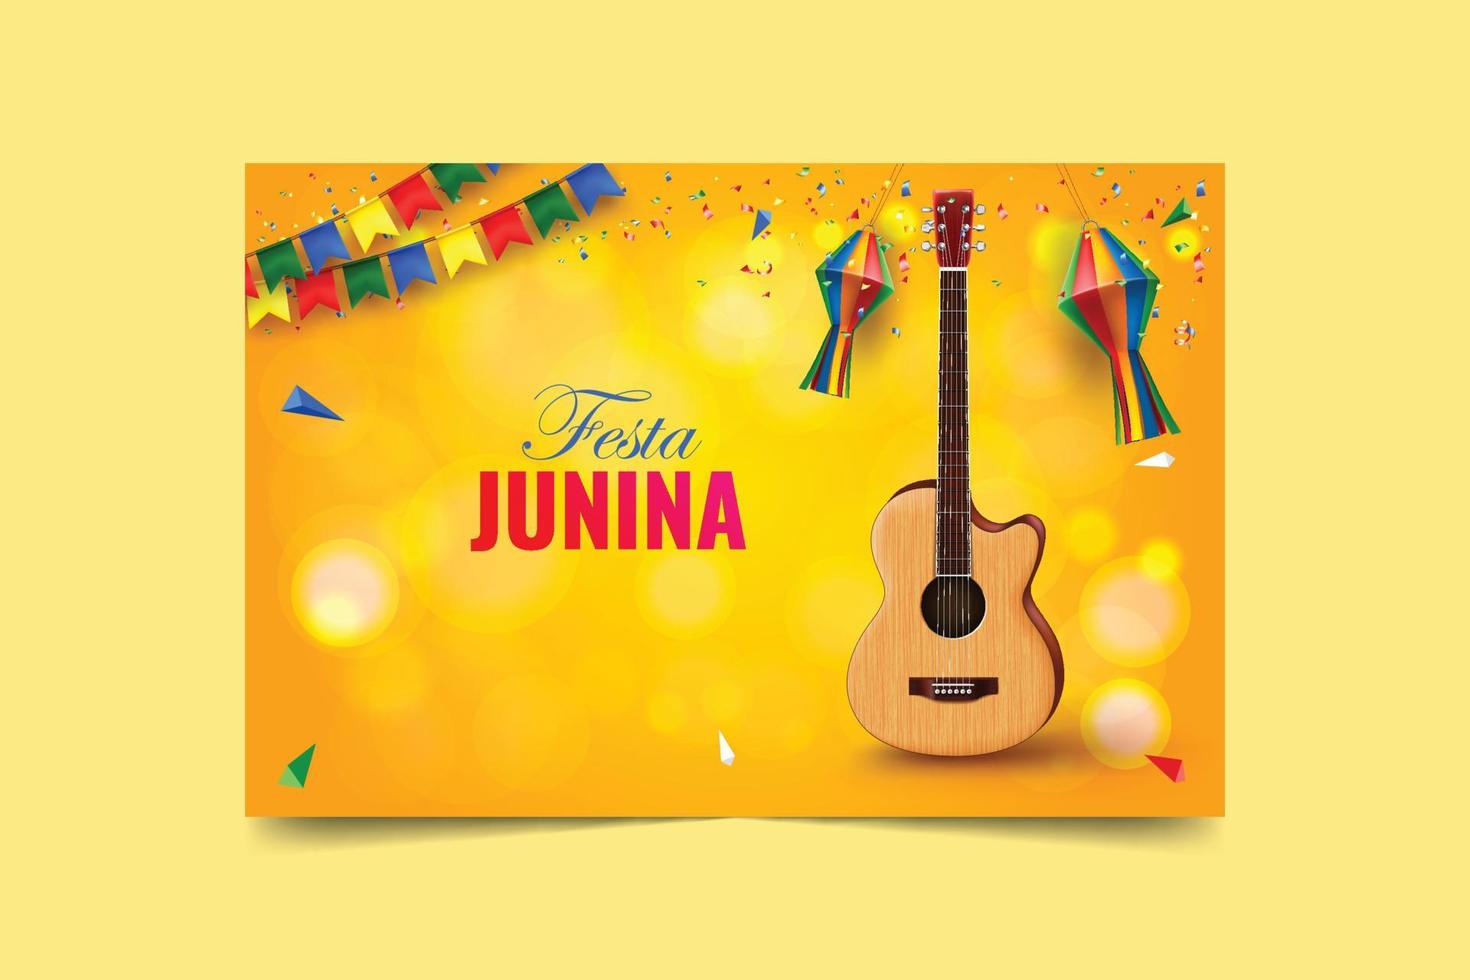 festa junina yellow abstract banner background design with guitar illustration vector